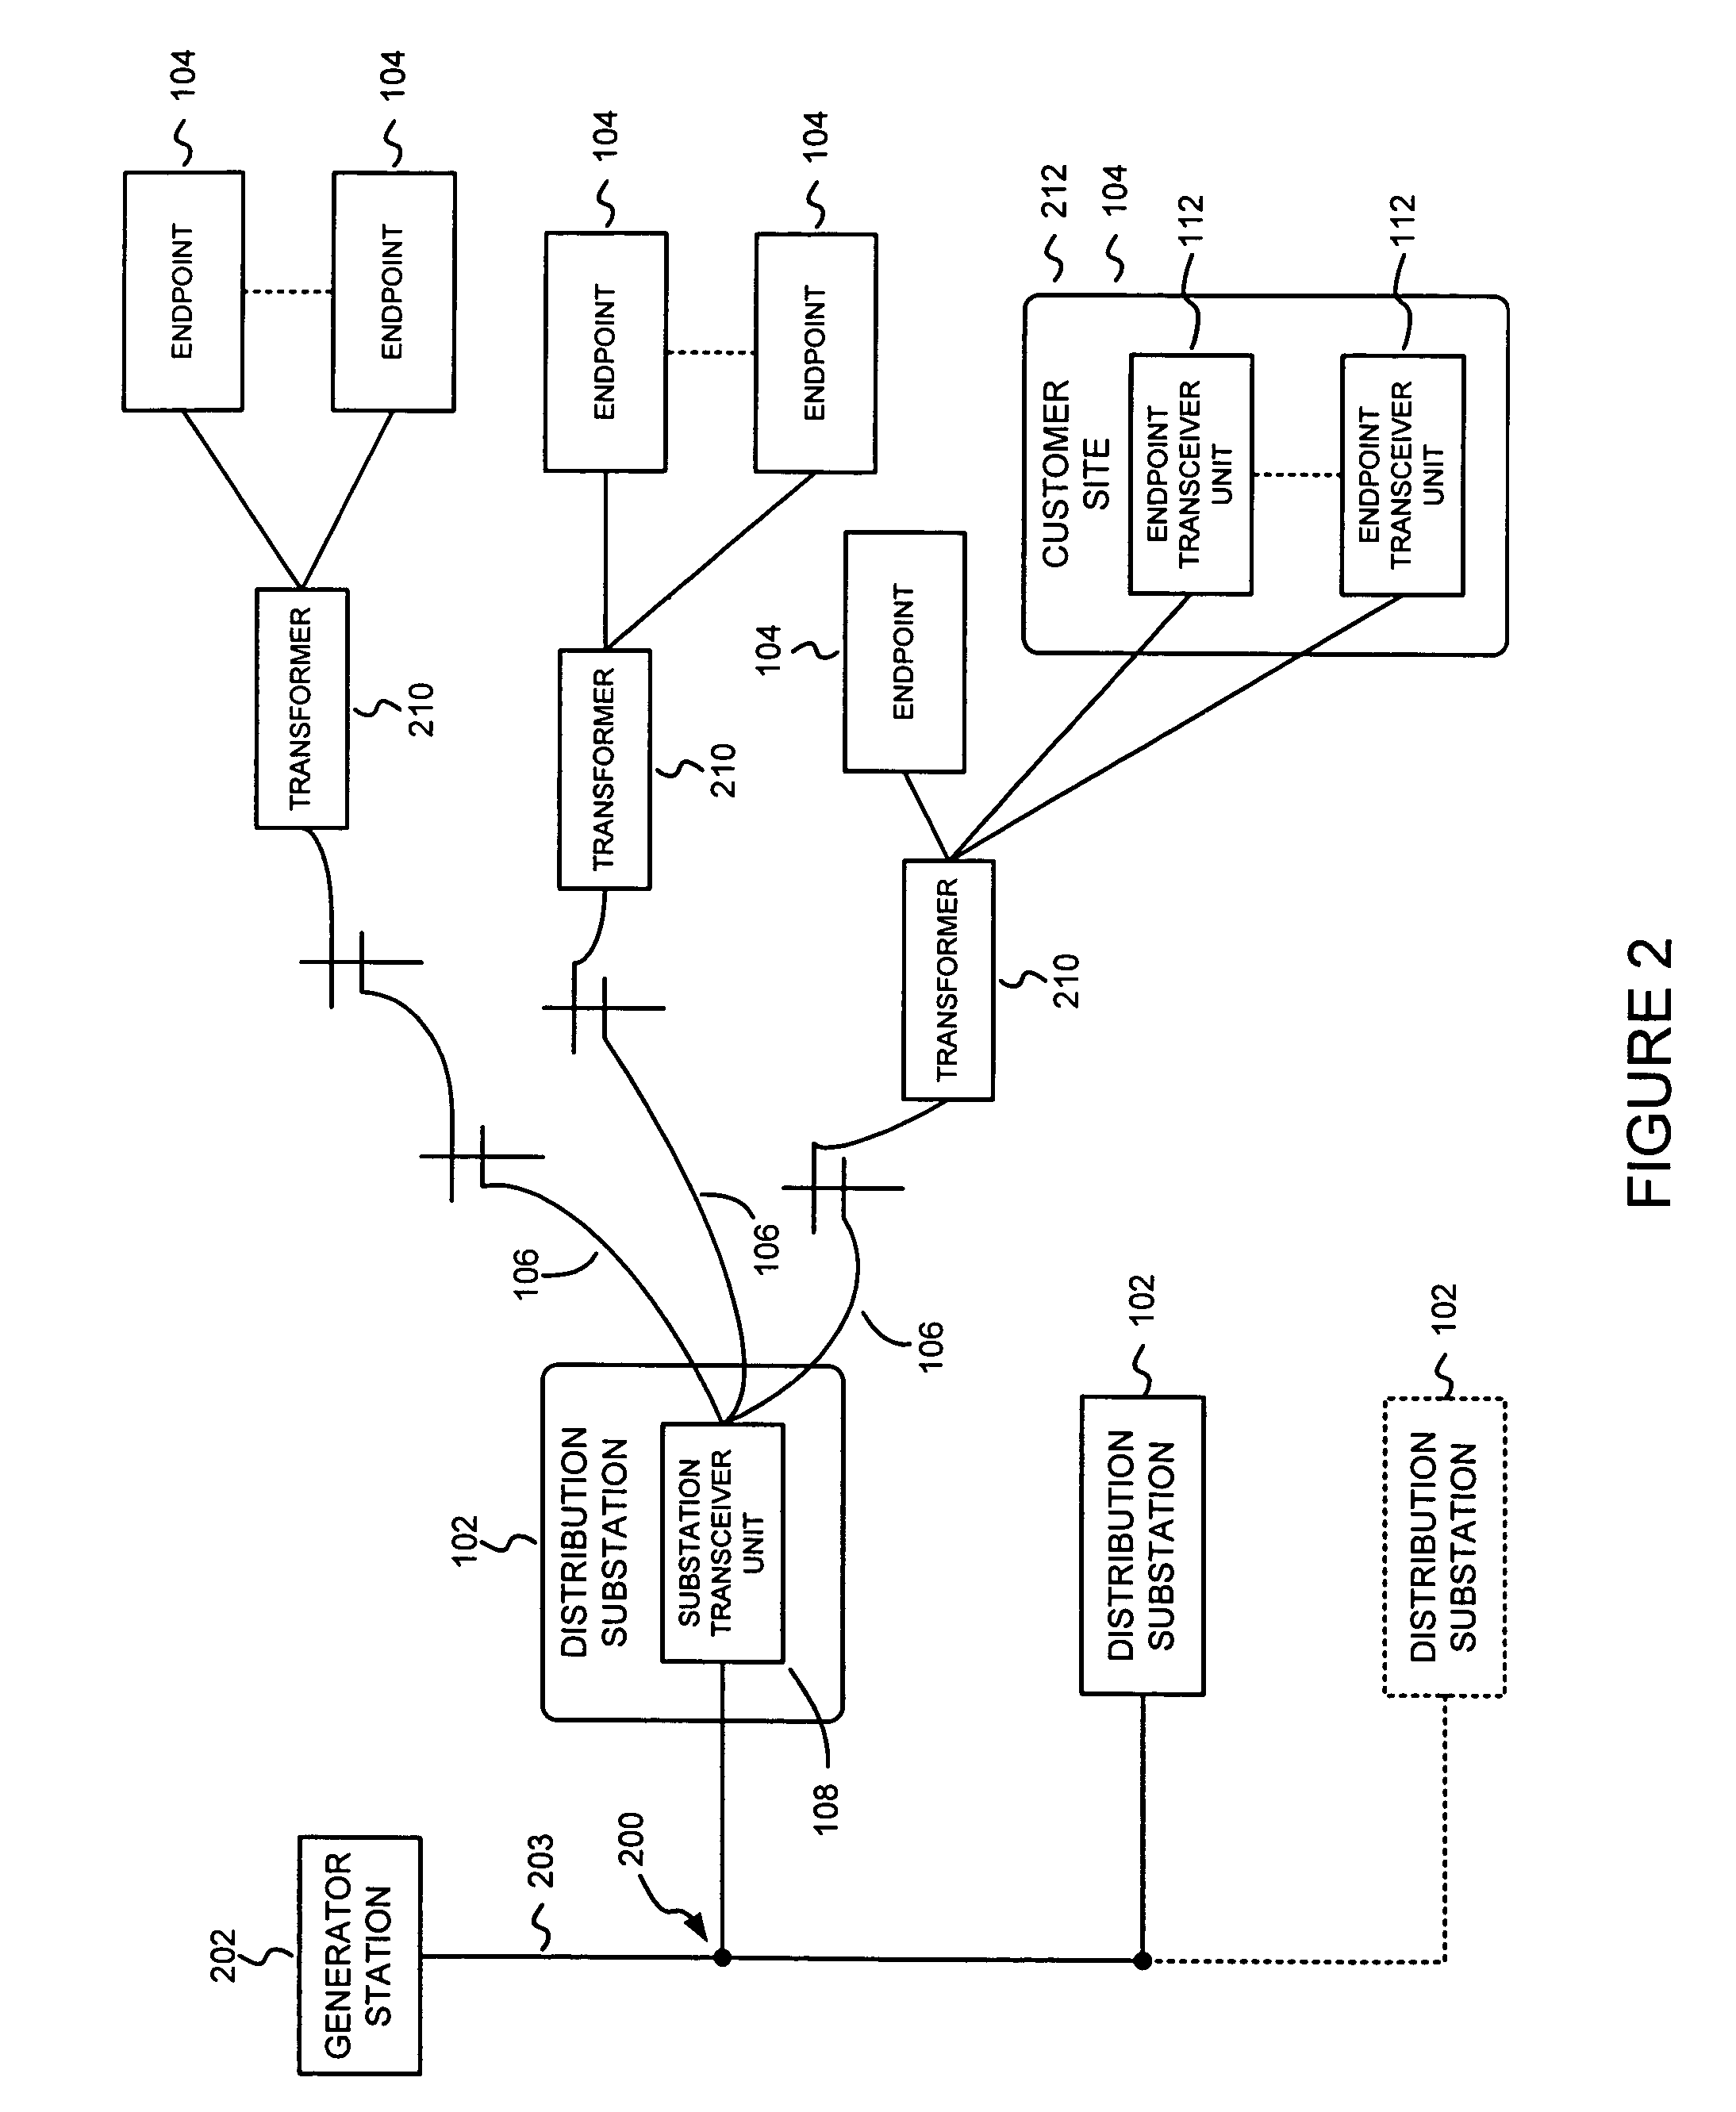 Endpoint transmitter and power generation system